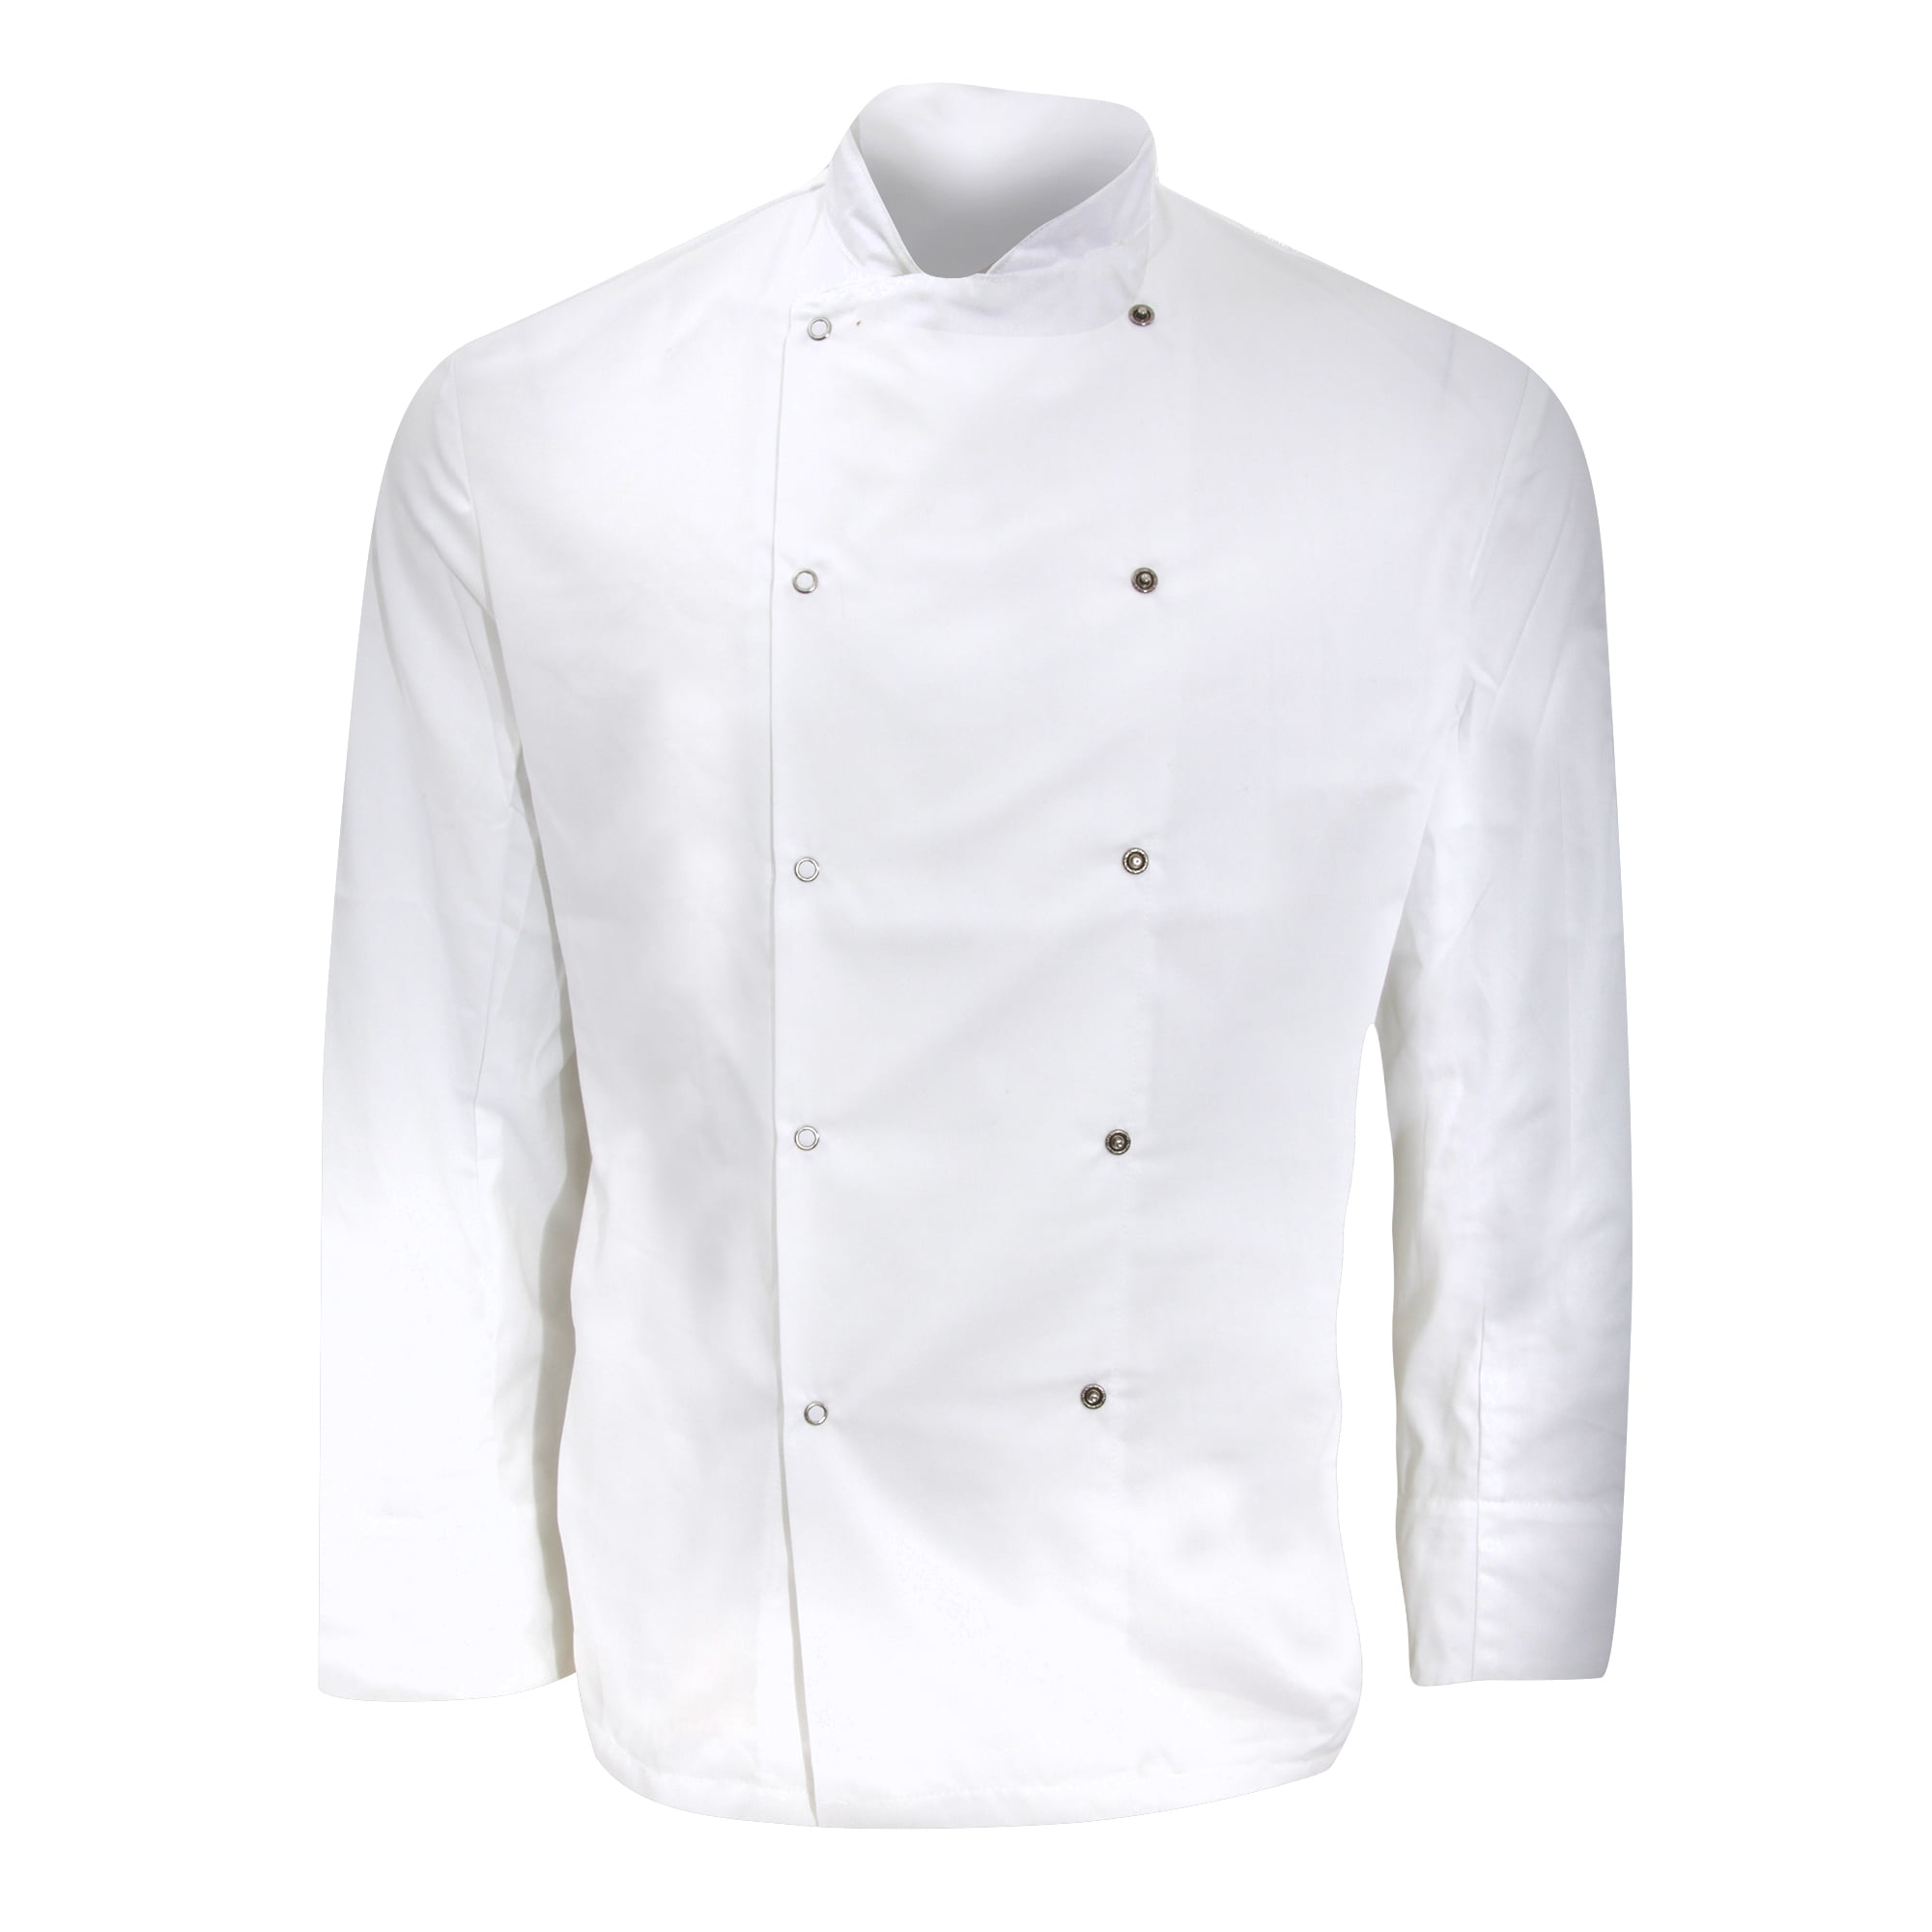 Dennys Long Sleeve Chef's Jacket Cooks Kitchen Top Studded Ventilated DD33L 